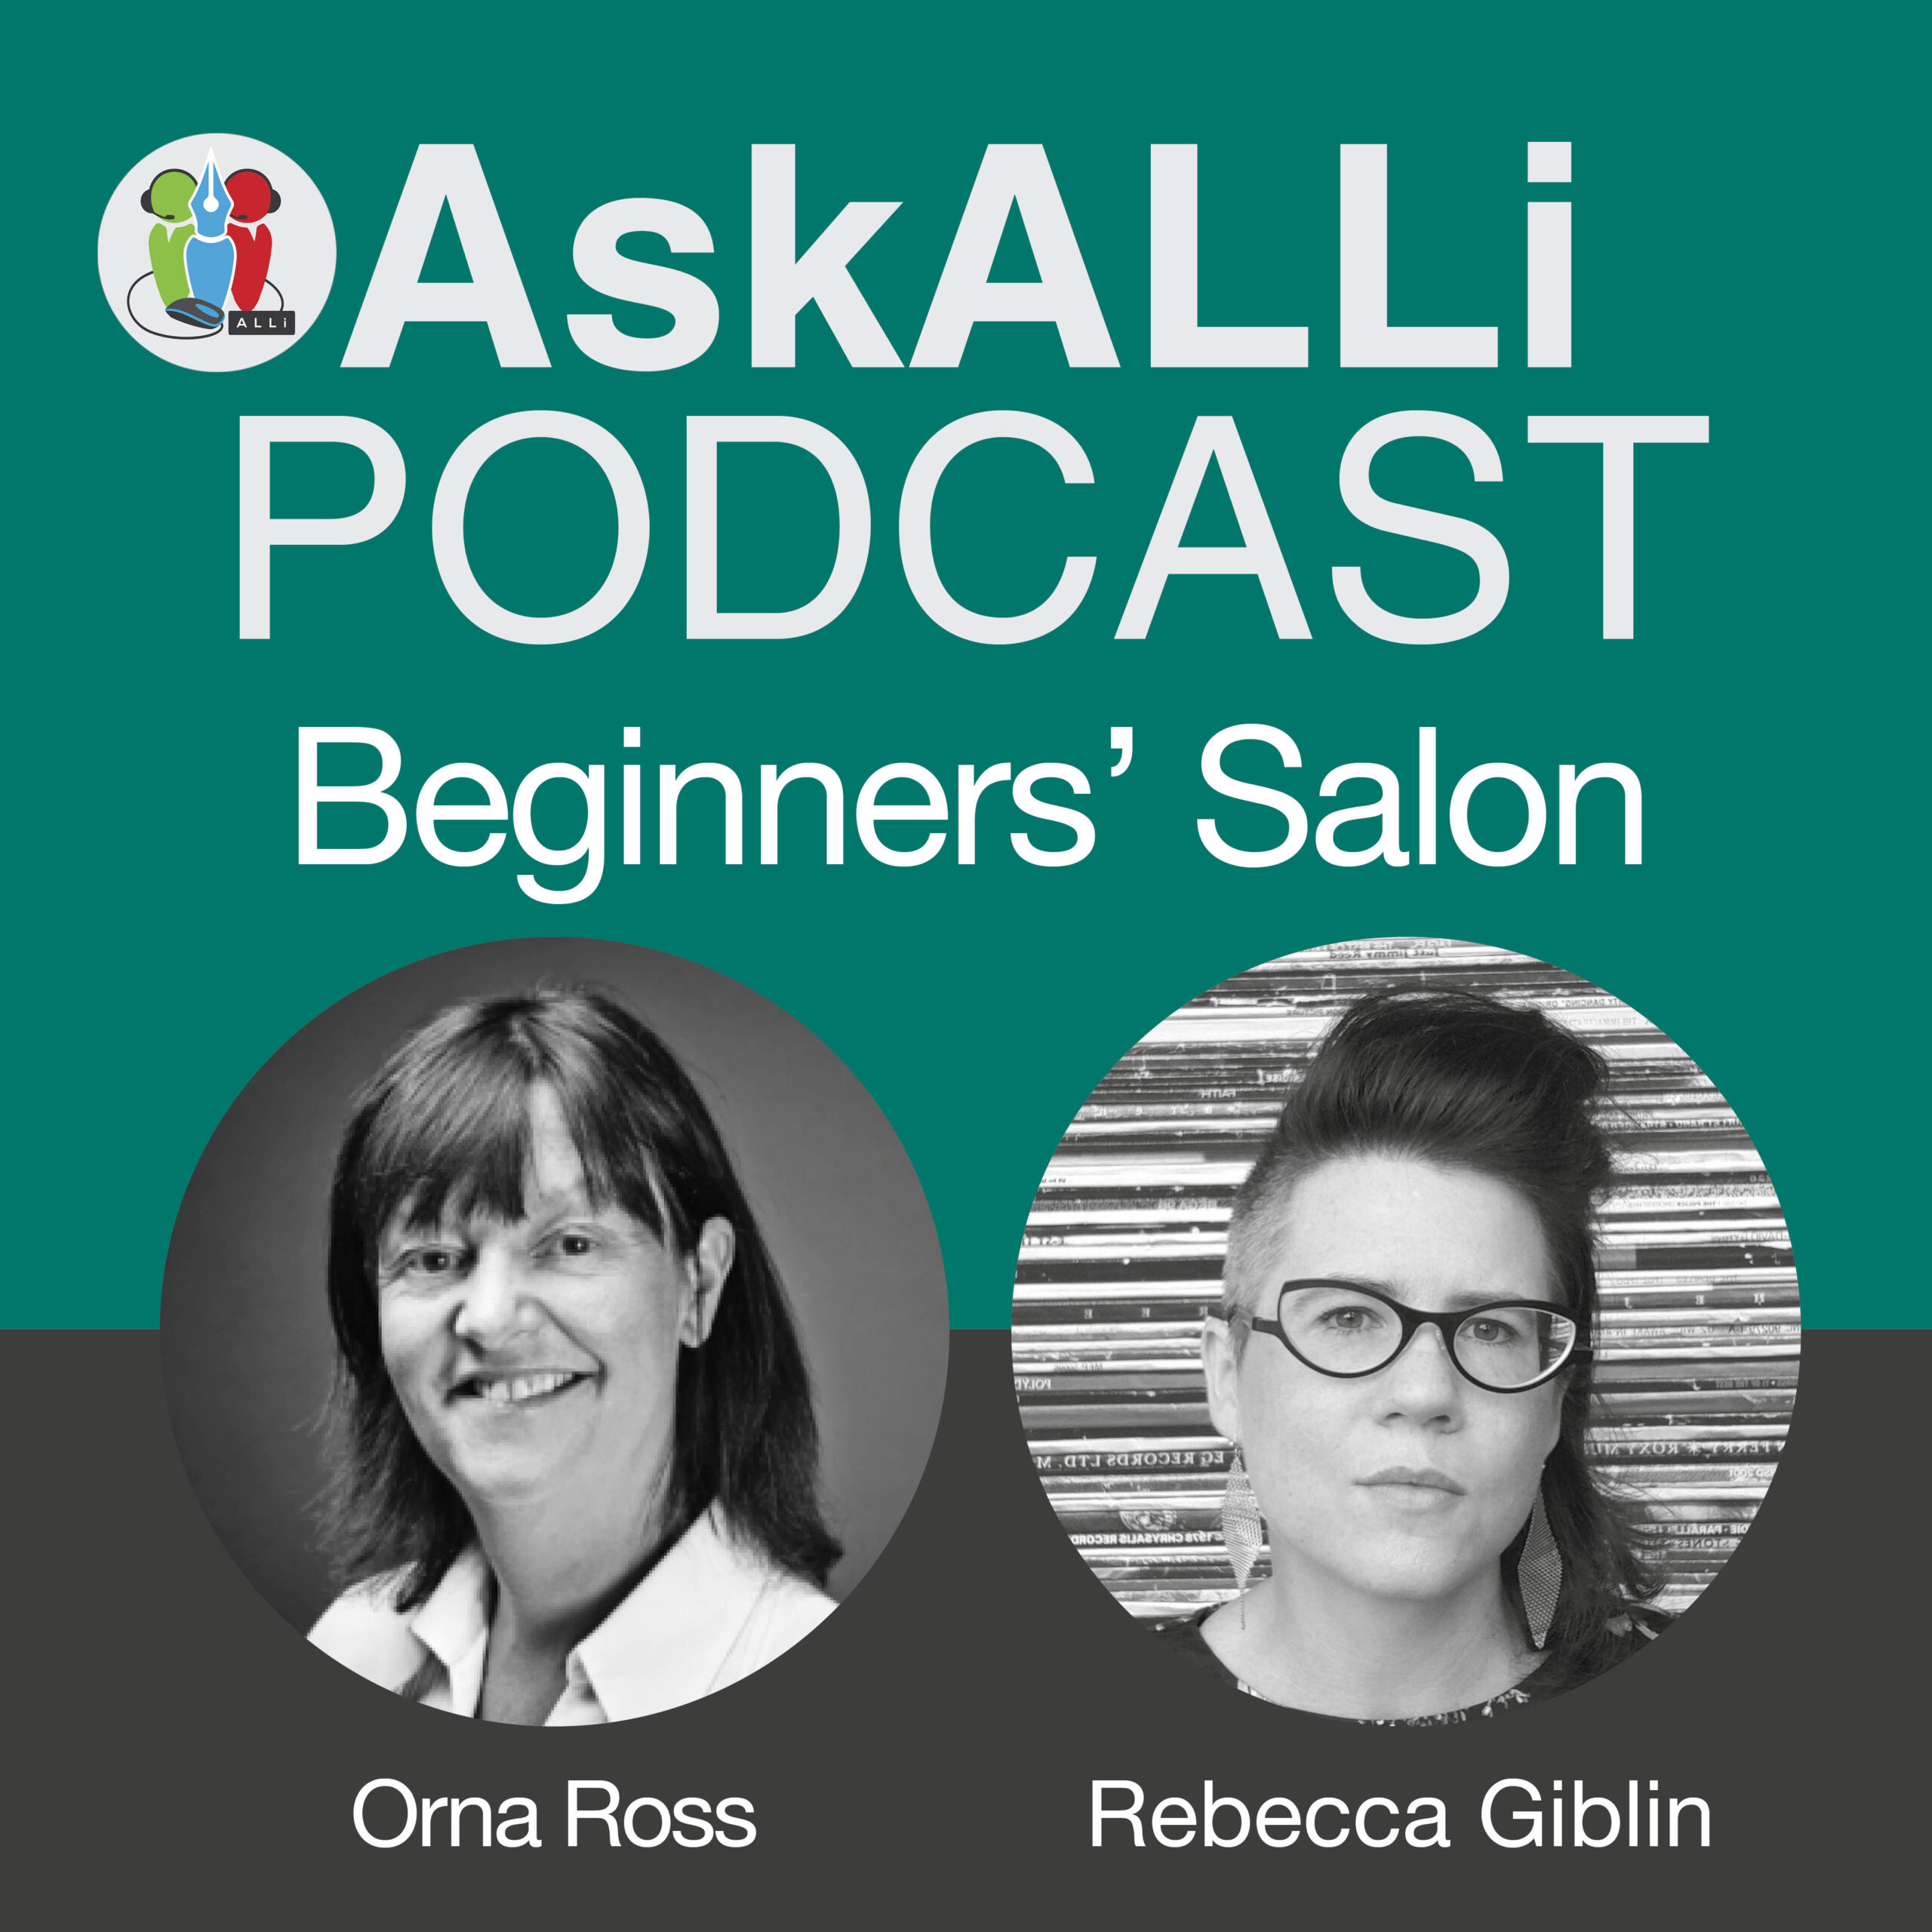 Copyright Matters With Orna Ross And Rebecca Giblin; Inspirational Indie Author Jane Davis; AskALLi Beginners Self-Publishing Salon For May 2019